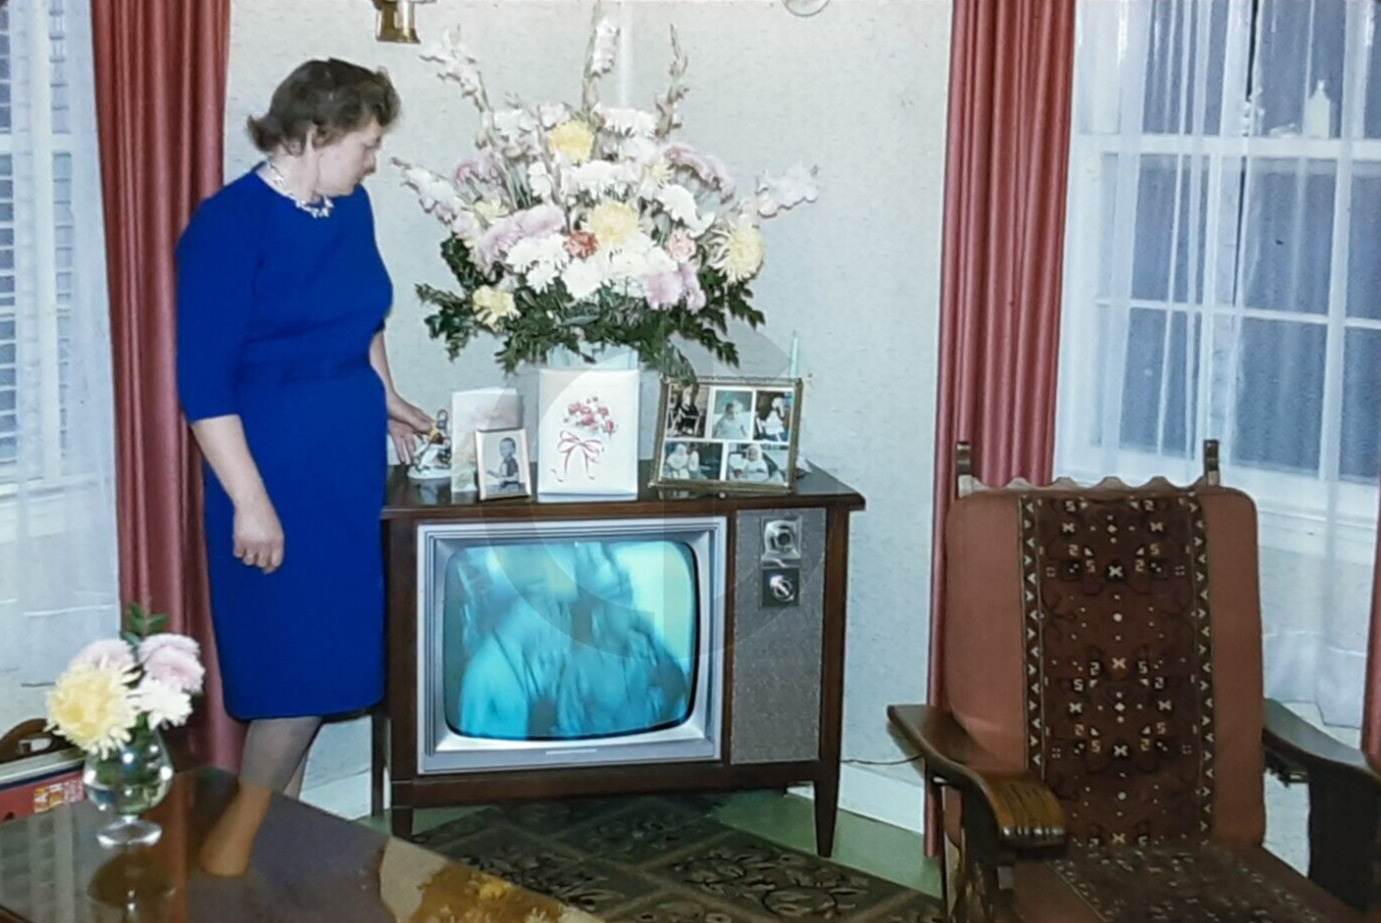 Classy Lady Standing Next to TV Playing McHale\'s Navy? - 1960\'s 35mm Slide